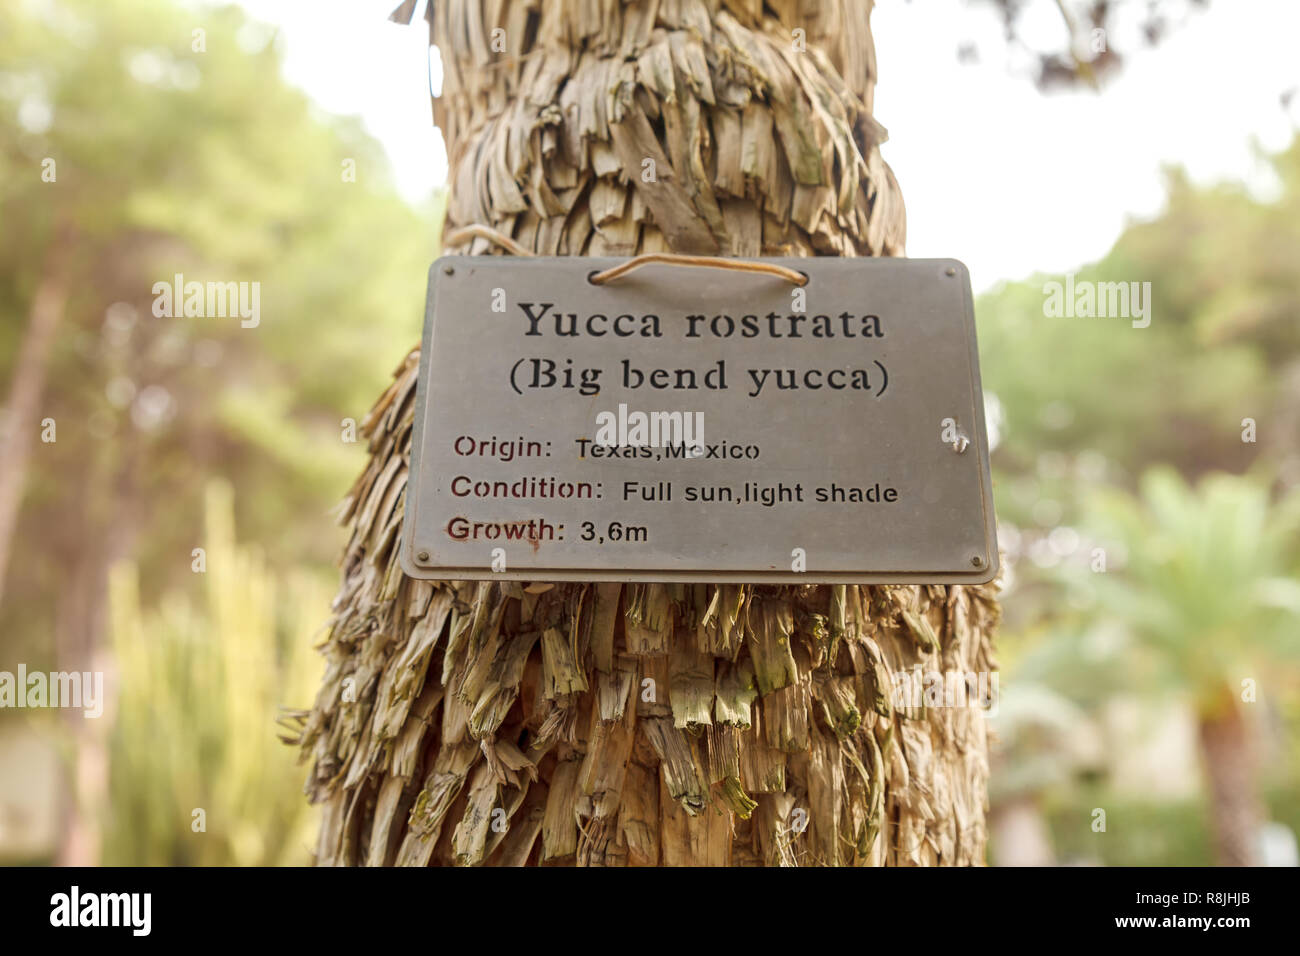 Information plate attached to the palm Yucca Rastrata, indicating its name in Latin and English. Close-up Stock Photo